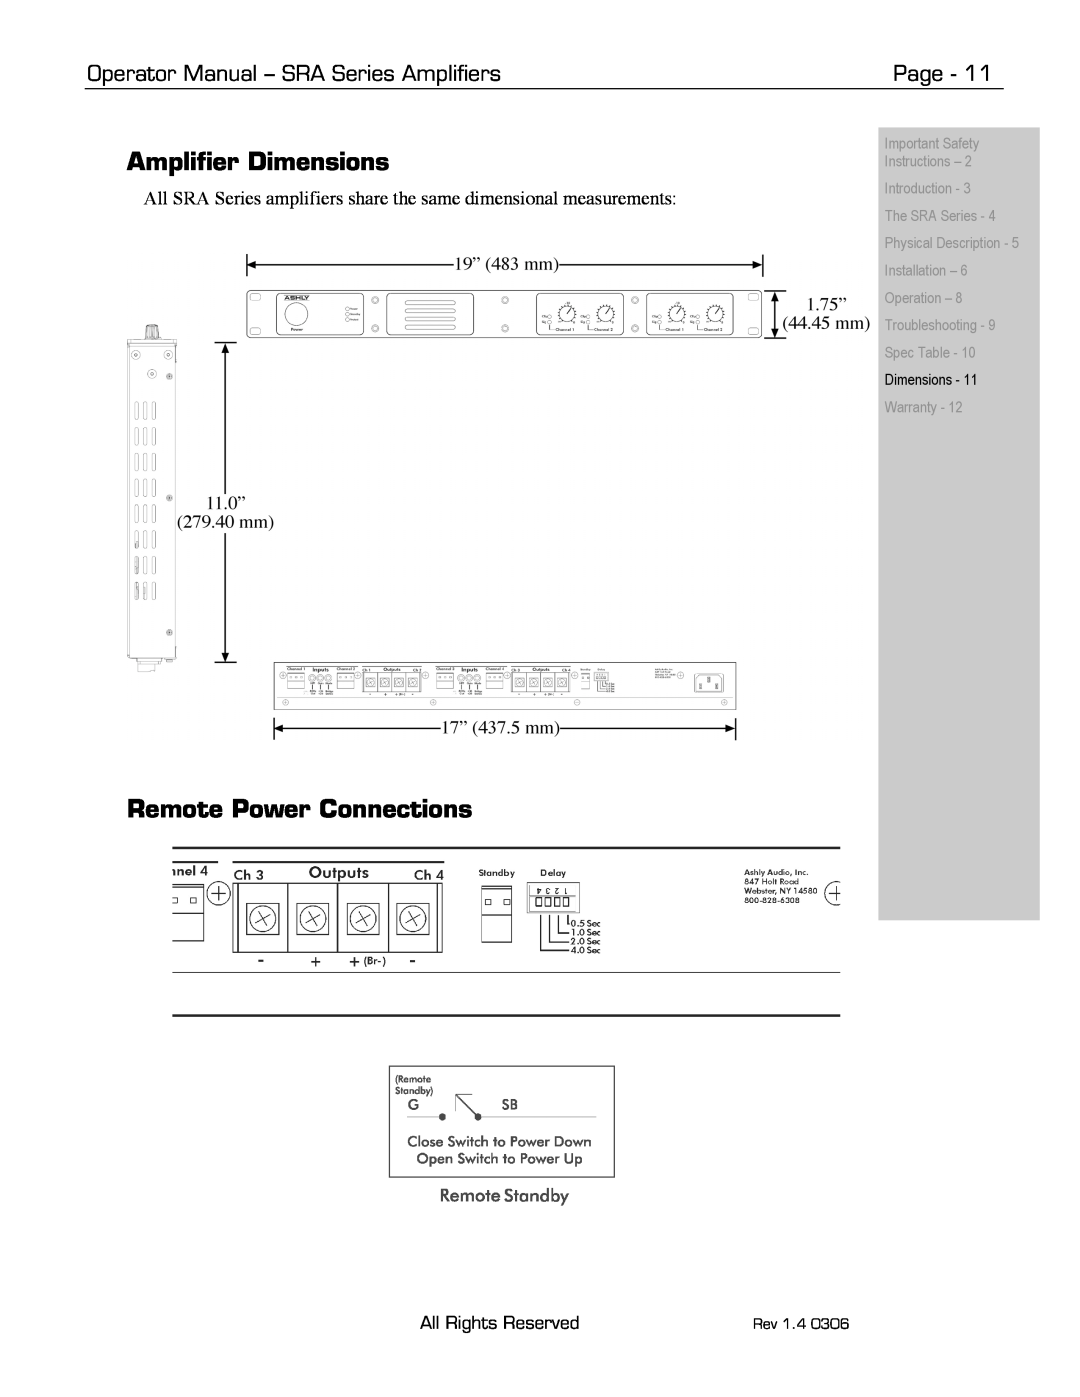 Ashly SRA-Series Amplifier Dimensions, Remote Power Connections, Operator Manual - SRA Series Amplifiers, Page, Spec Table 